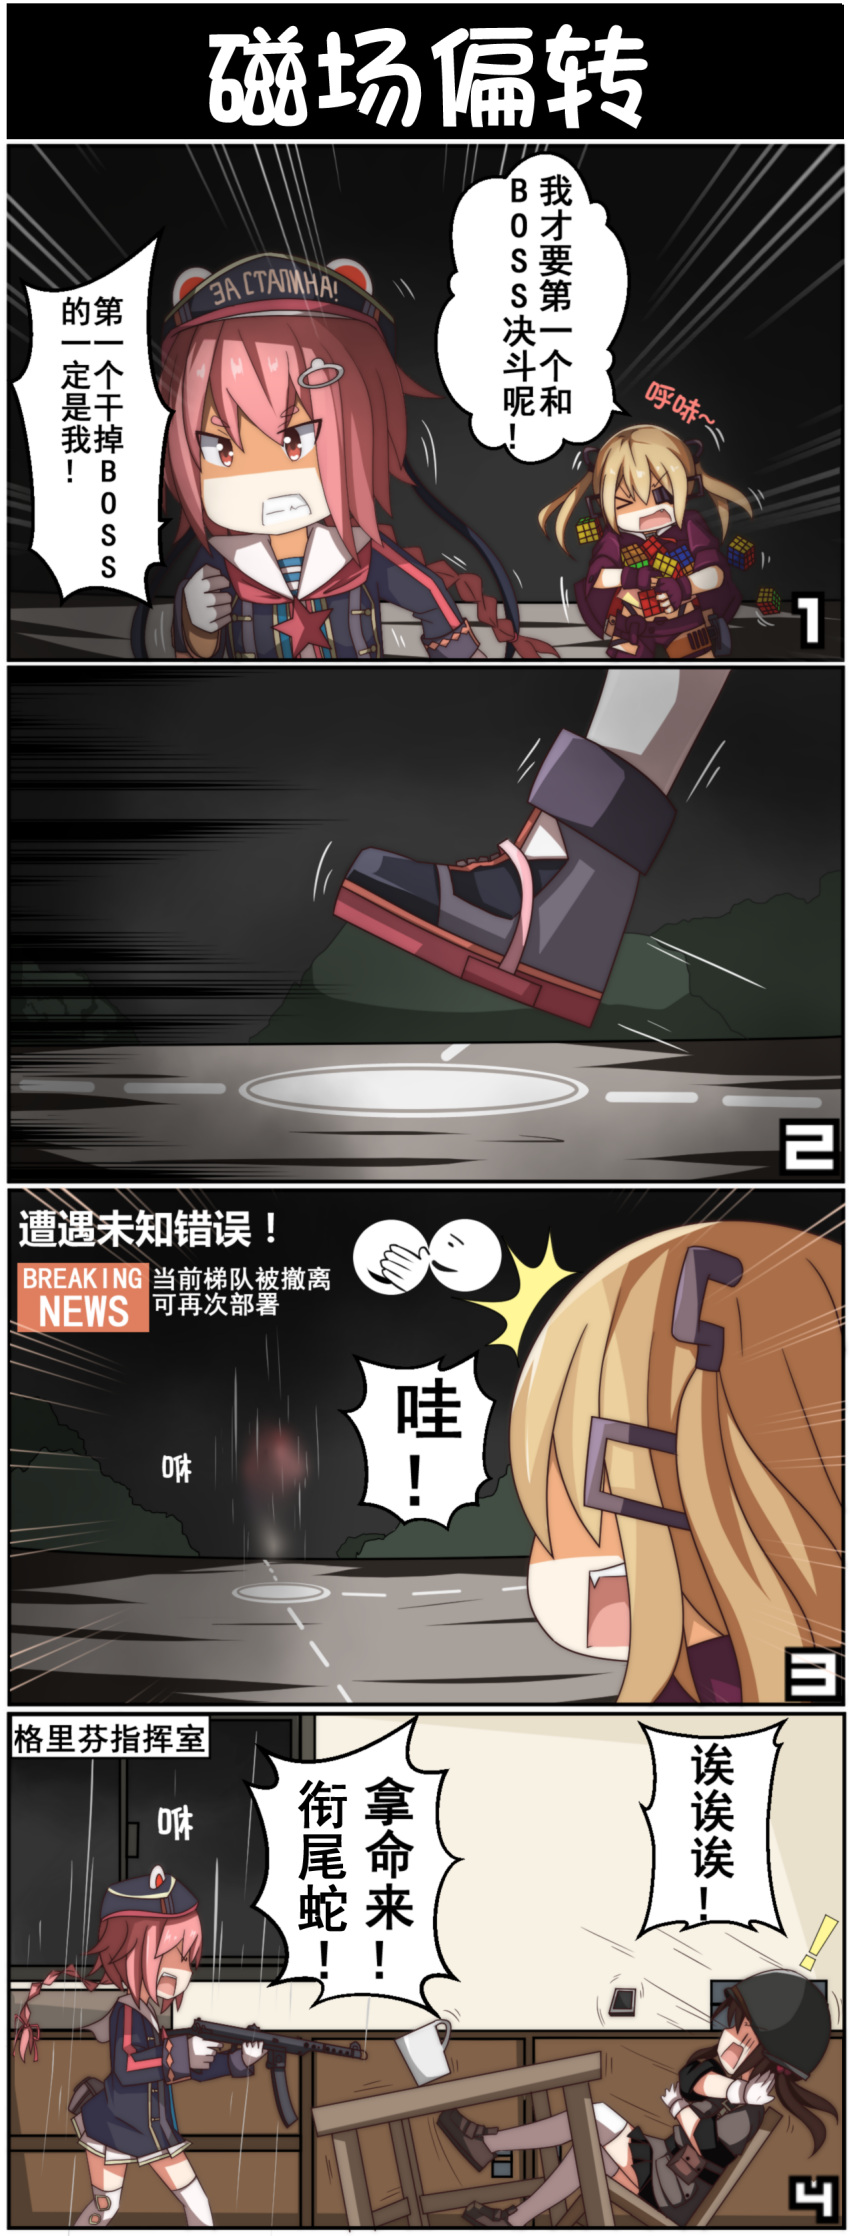 3girls 4koma absurdres ac130 angry blonde_hair chinese coffee_mug comic commentary commentary_request eyepatch gameplay_mechanics girls_frontline gun hat helmet highres multiple_girls pink_eyes pink_hair ponytail pps-43 pps-43_(girls_frontline) rubik's_cube russian_clothes submachine_gun thigh-highs translation_request vz.61_(girls_frontline) weapon